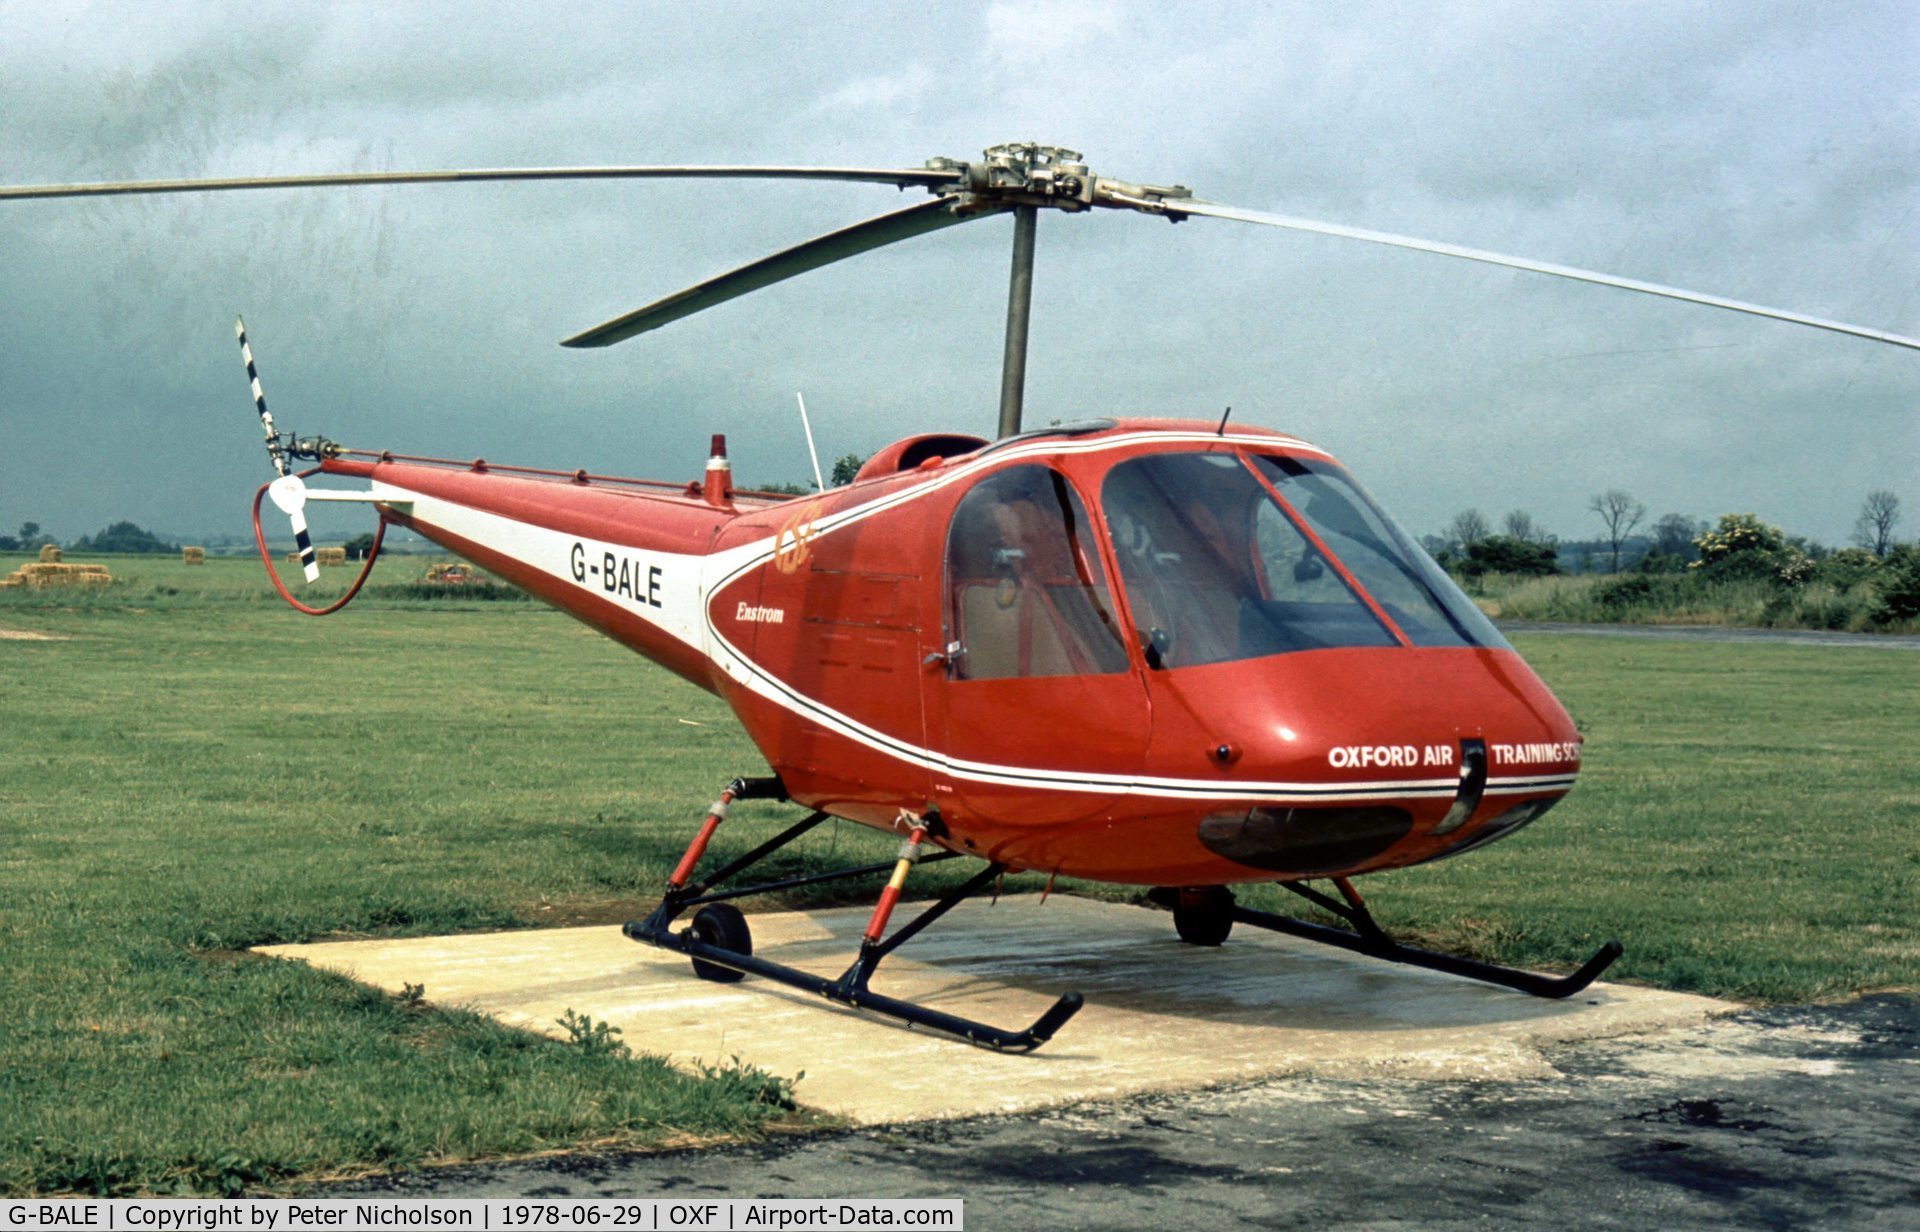 G-BALE, 1973 Enstrom F-28A-UK C/N 119, This helicopter was with the Oxford Air Training School at Kidlington in the Summer of 1978.